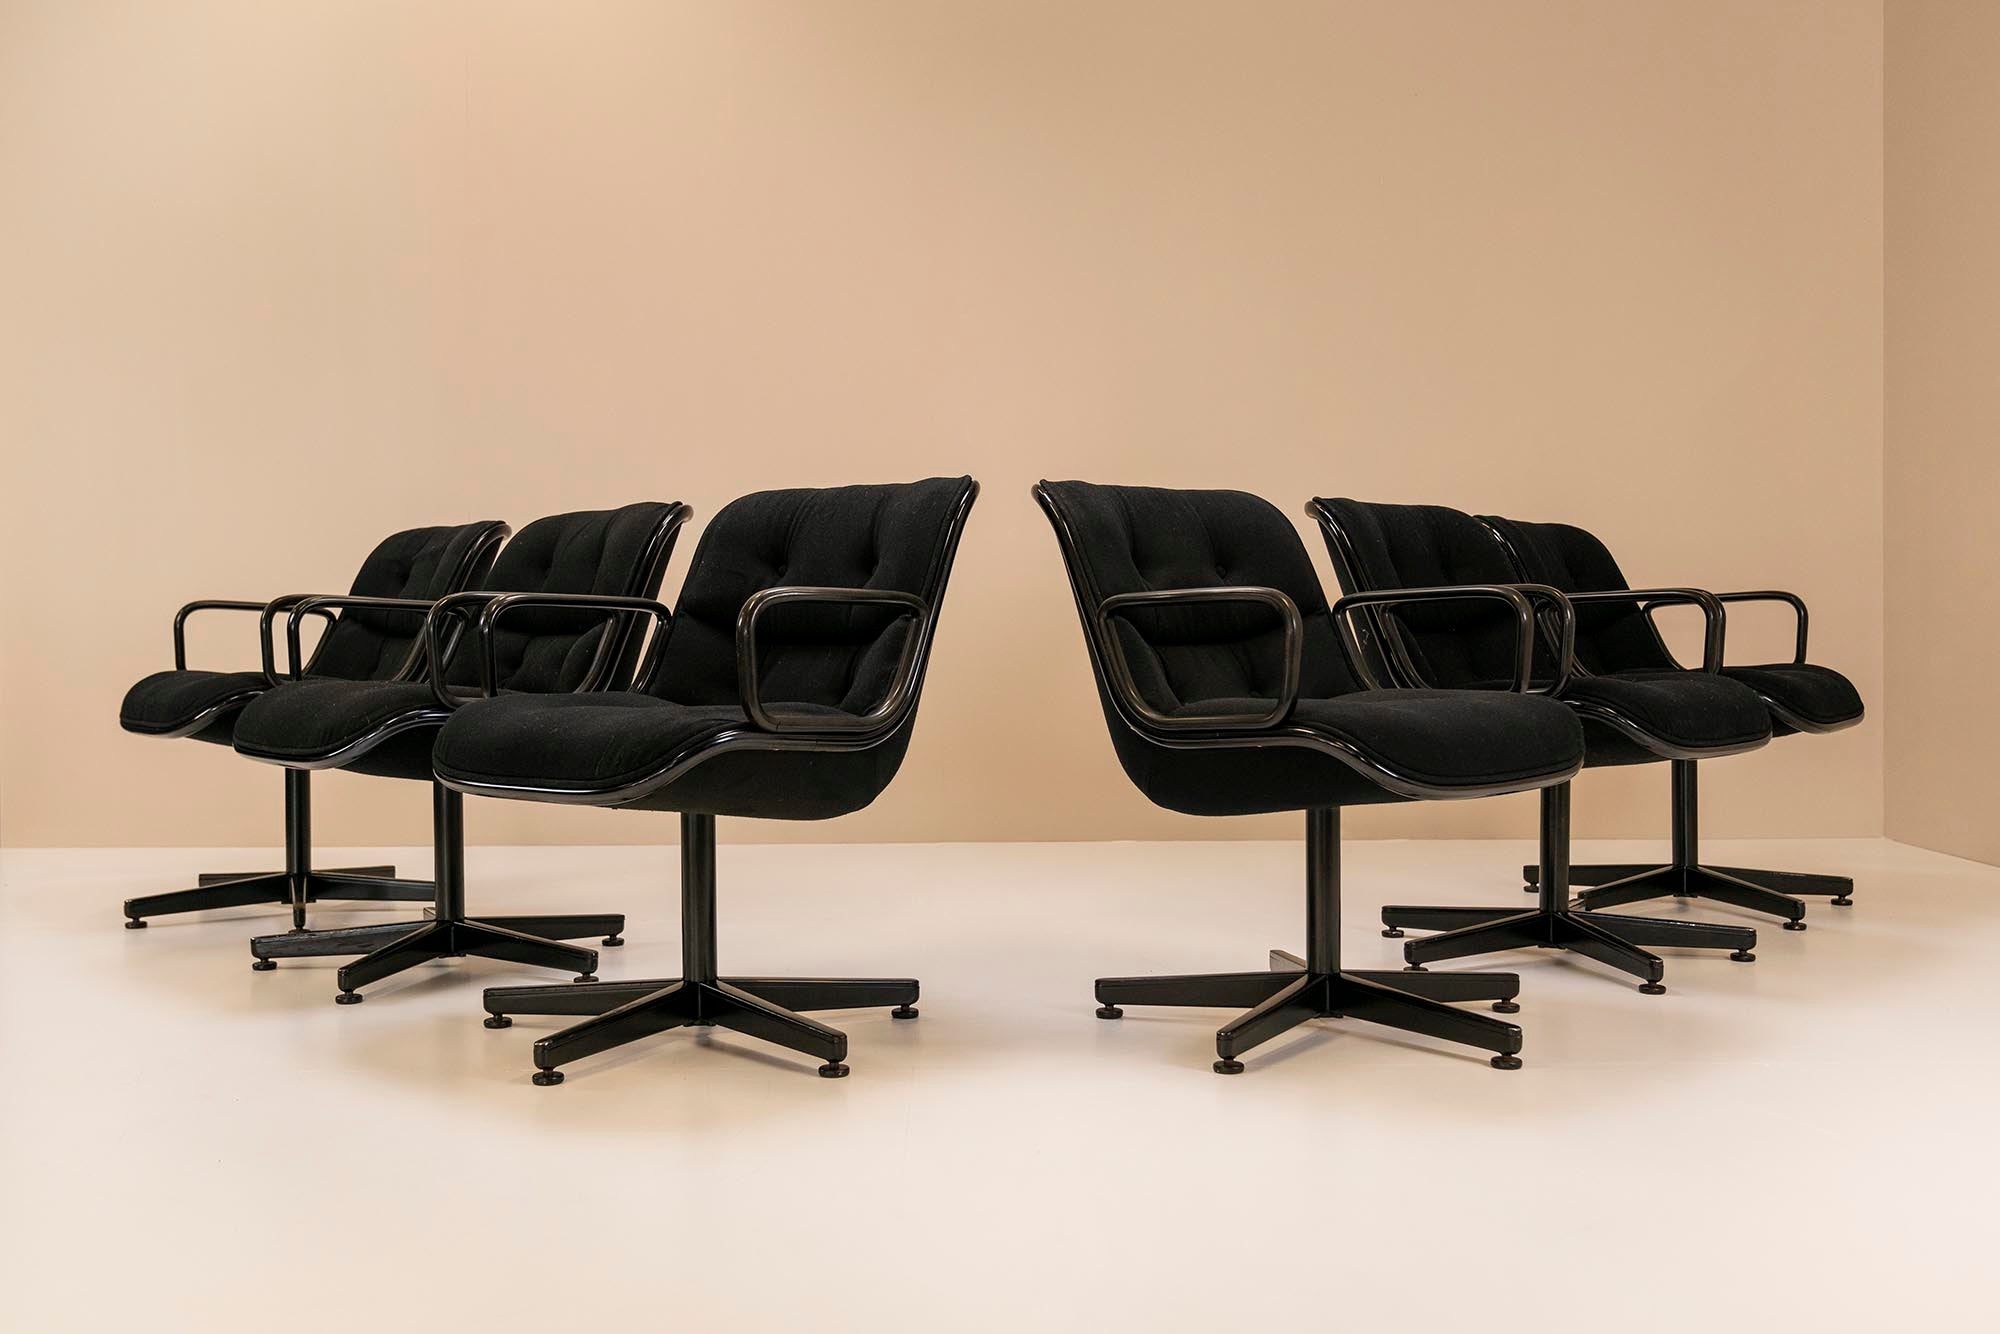 These 12 executive chairs are a true classic hailing from the illustrious stable of manufacturer Knoll, designed in 1963 by the American designer Charles Pollock. An absolute master in creating office furniture that mainly served and still serves in